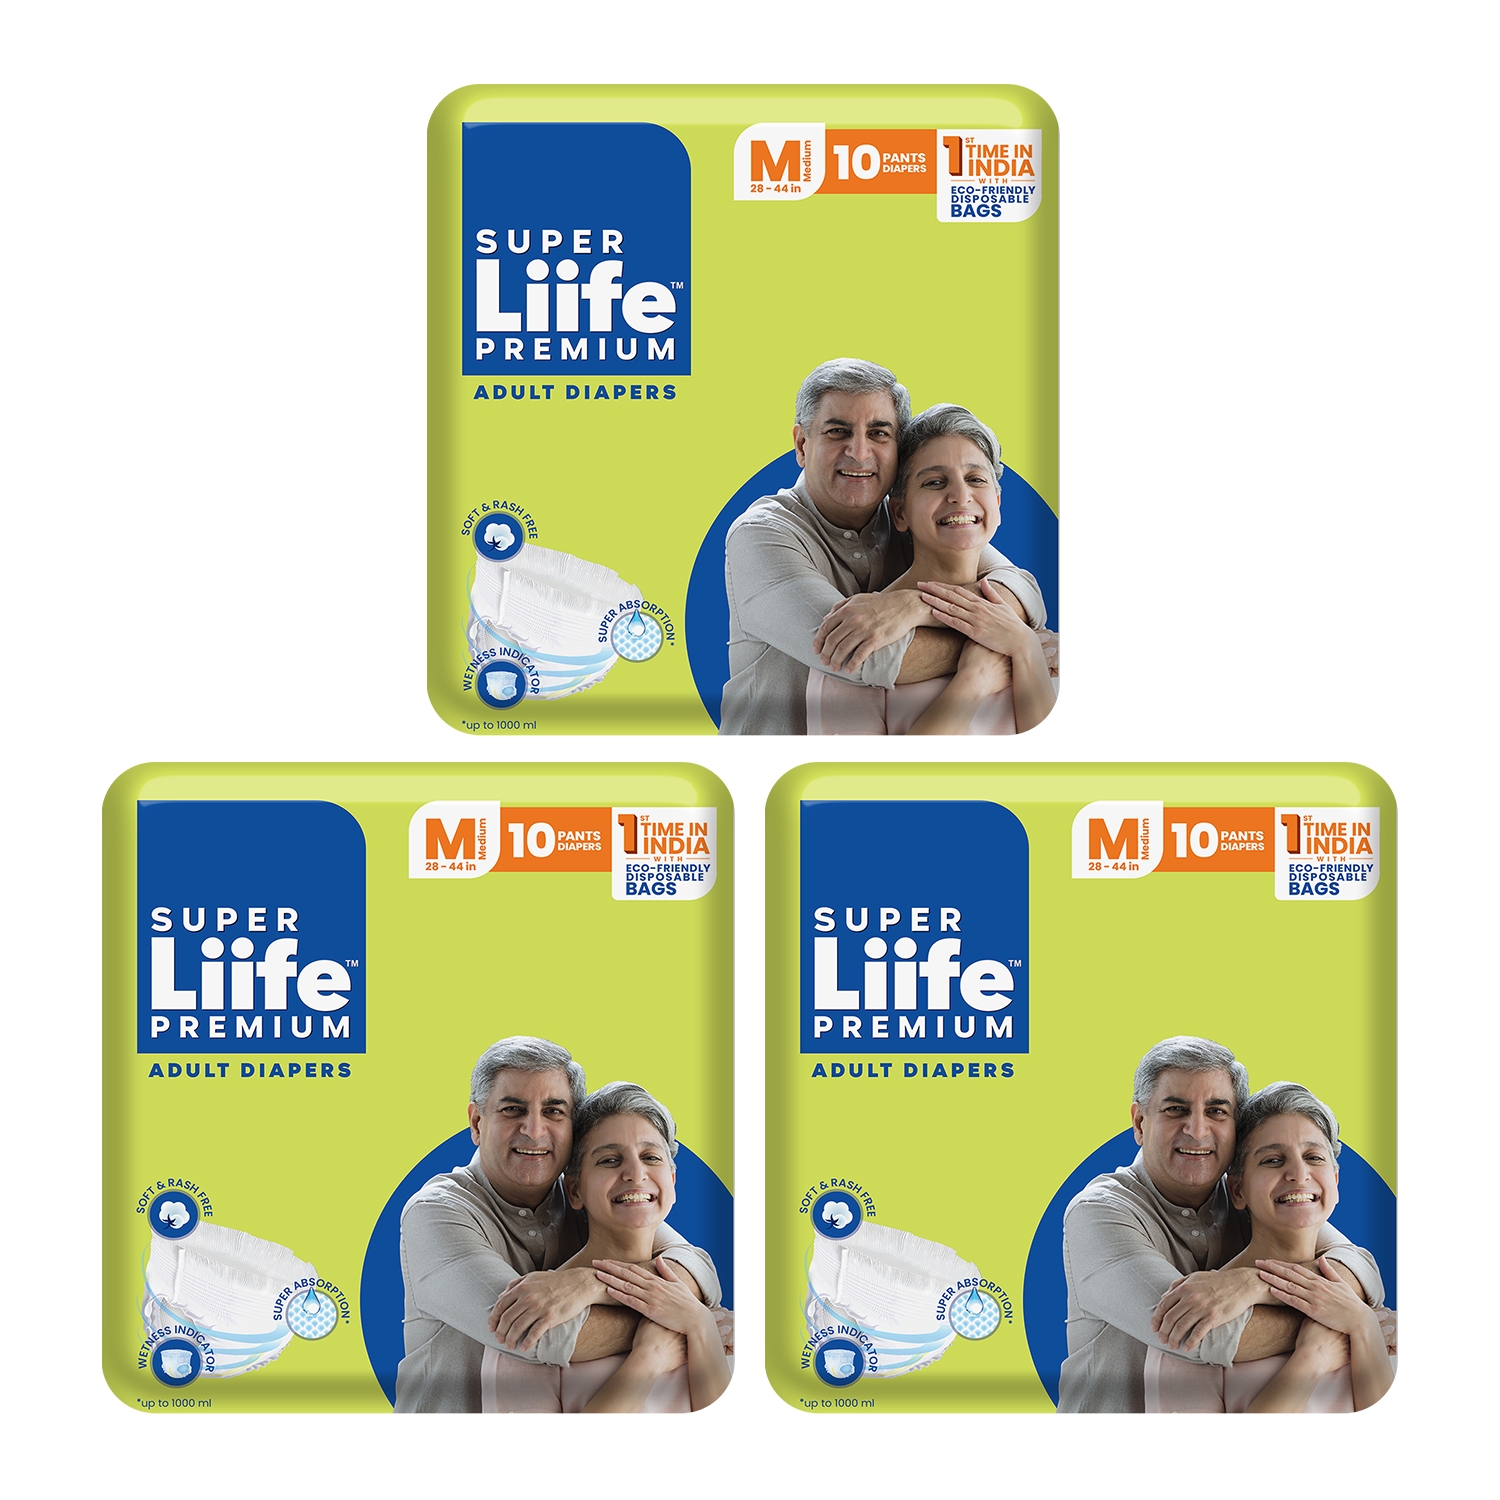 Super Liife | Super Liife Rash Free Adult Diapers Pants with Wetness Indicator and Disposable Bags - 30 Count (Medium) 0